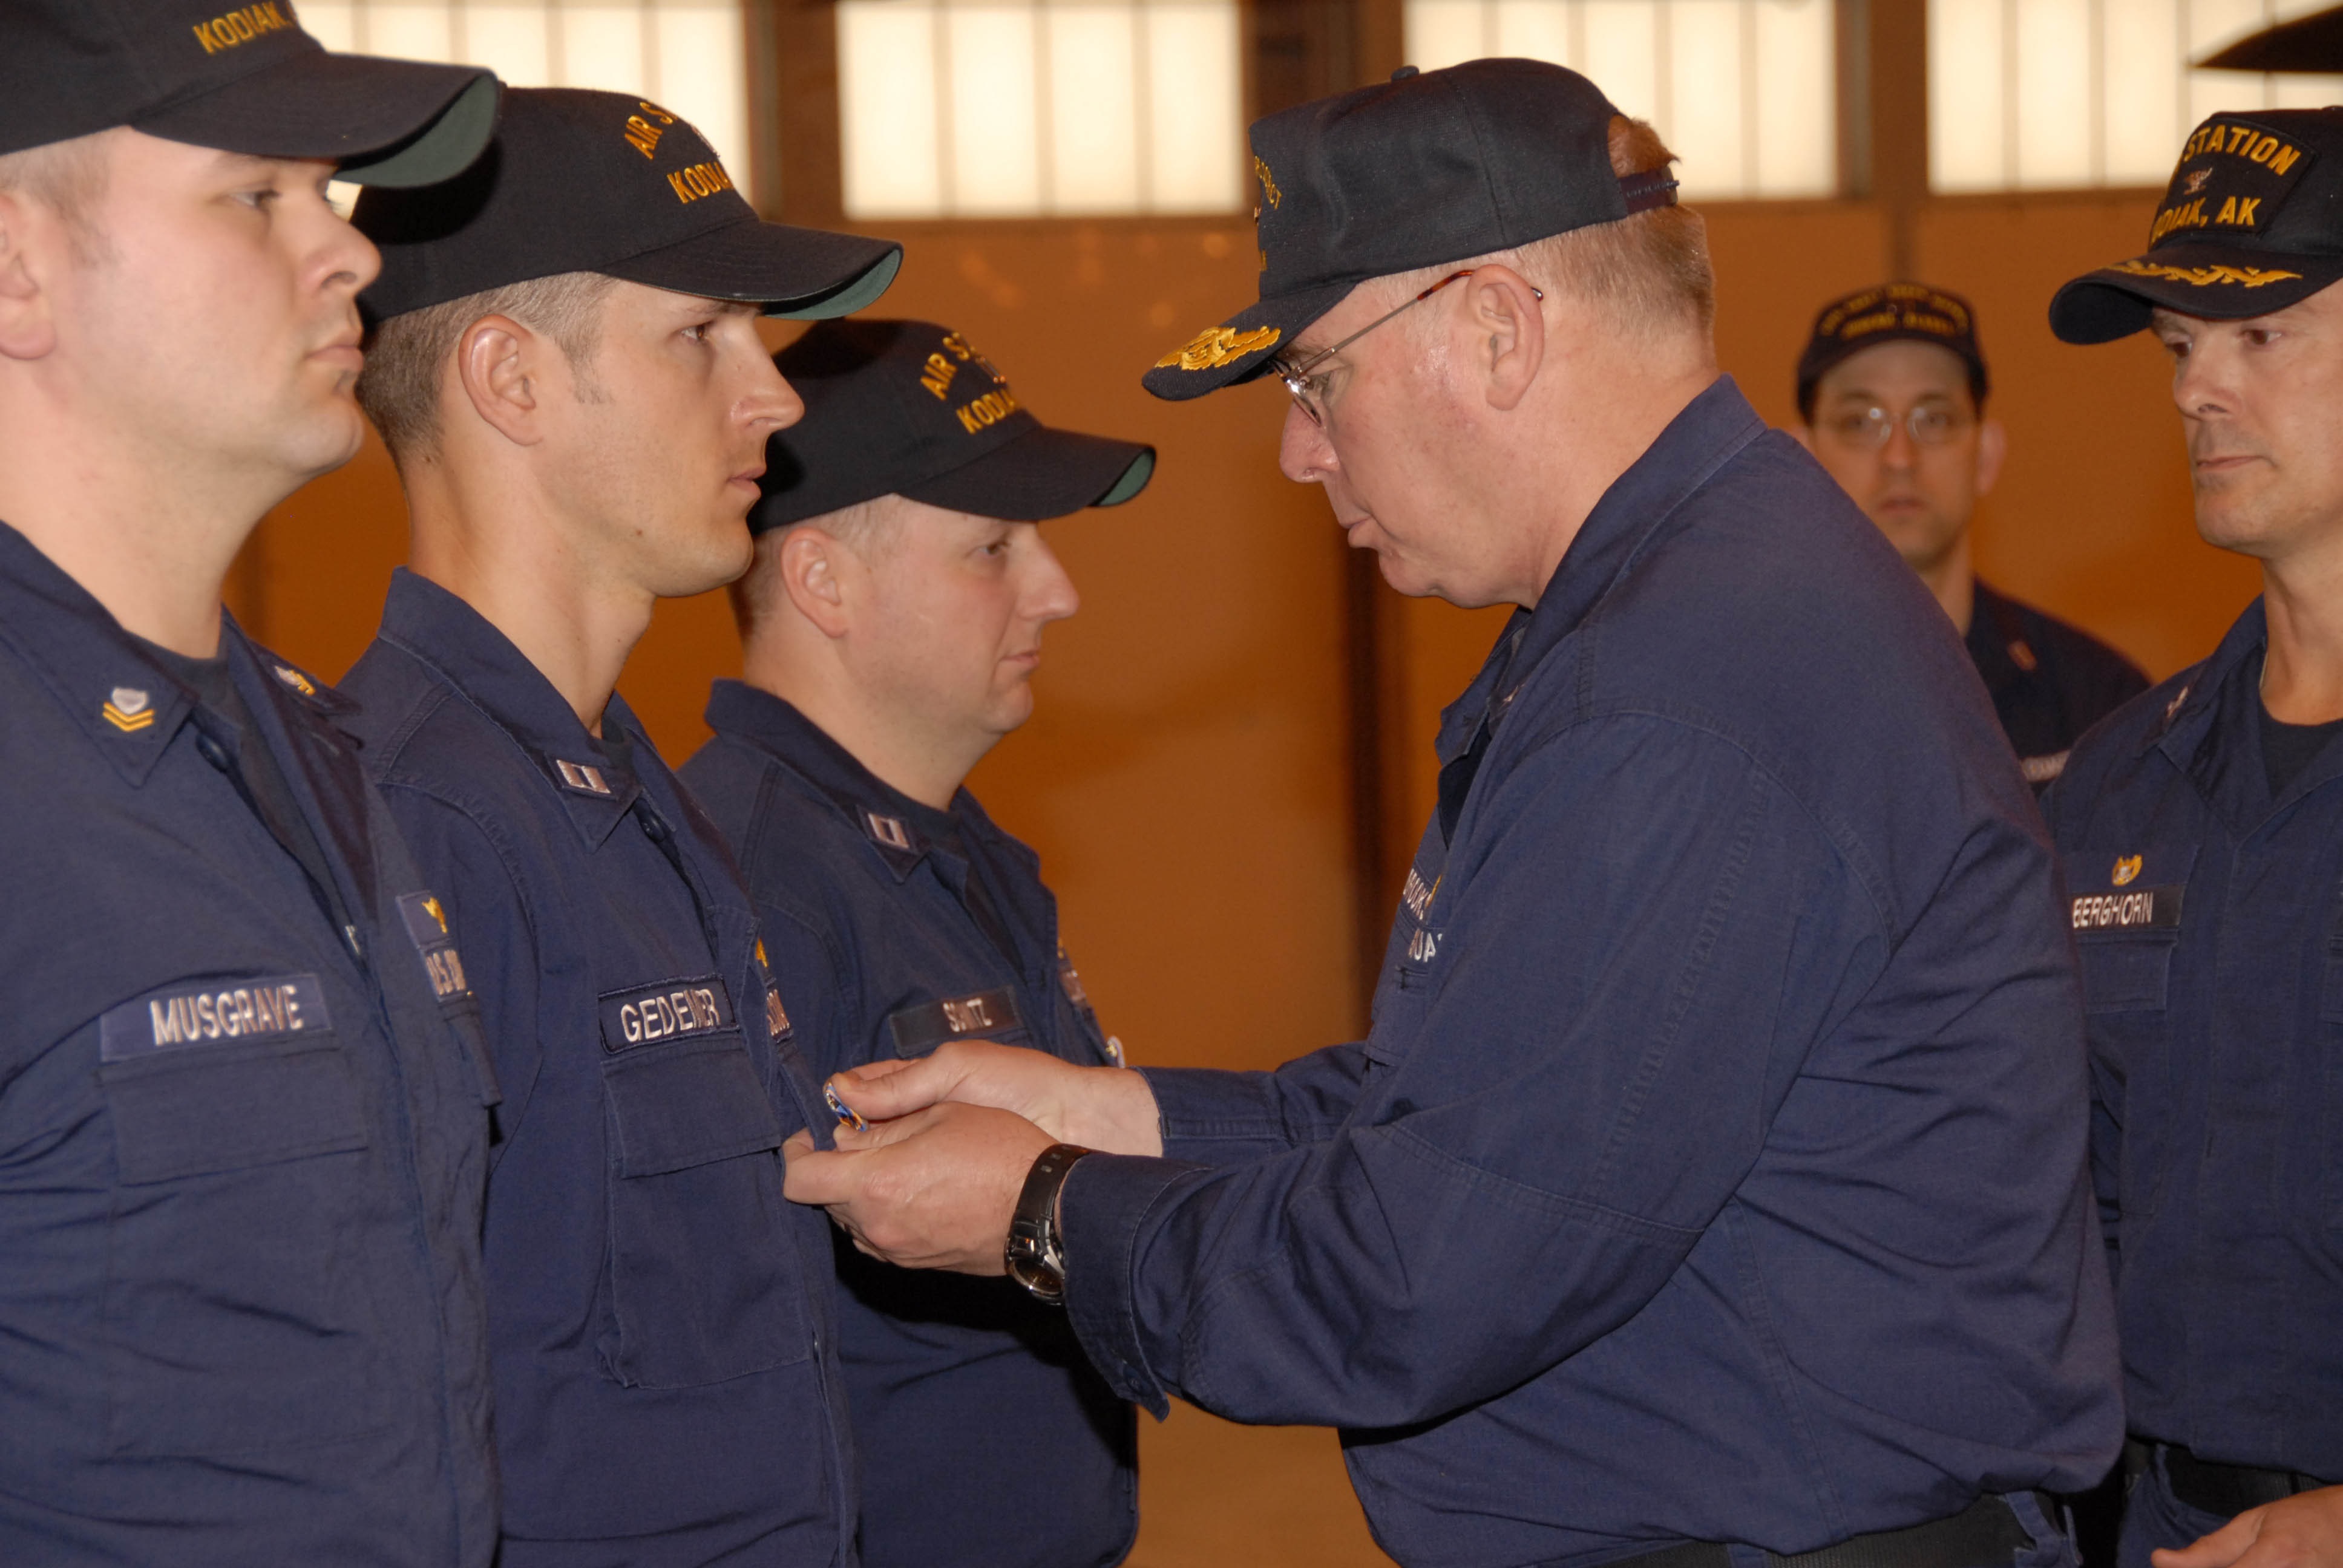 Members of Munro’s HH-65 aircrew receive the Air Medal from Coast Guard District Seventeen commander Rear Adm. Gene Brooks at a special ceremony Air Station Kodiak. Pictured are Lt. Greg Gedemer, Lt. T.J. Schmitz and Petty Officer 2nd Class Al Musgrave. (Petty Officer 1st Class Kurt Fredrickson, U.S. Coast Guard)